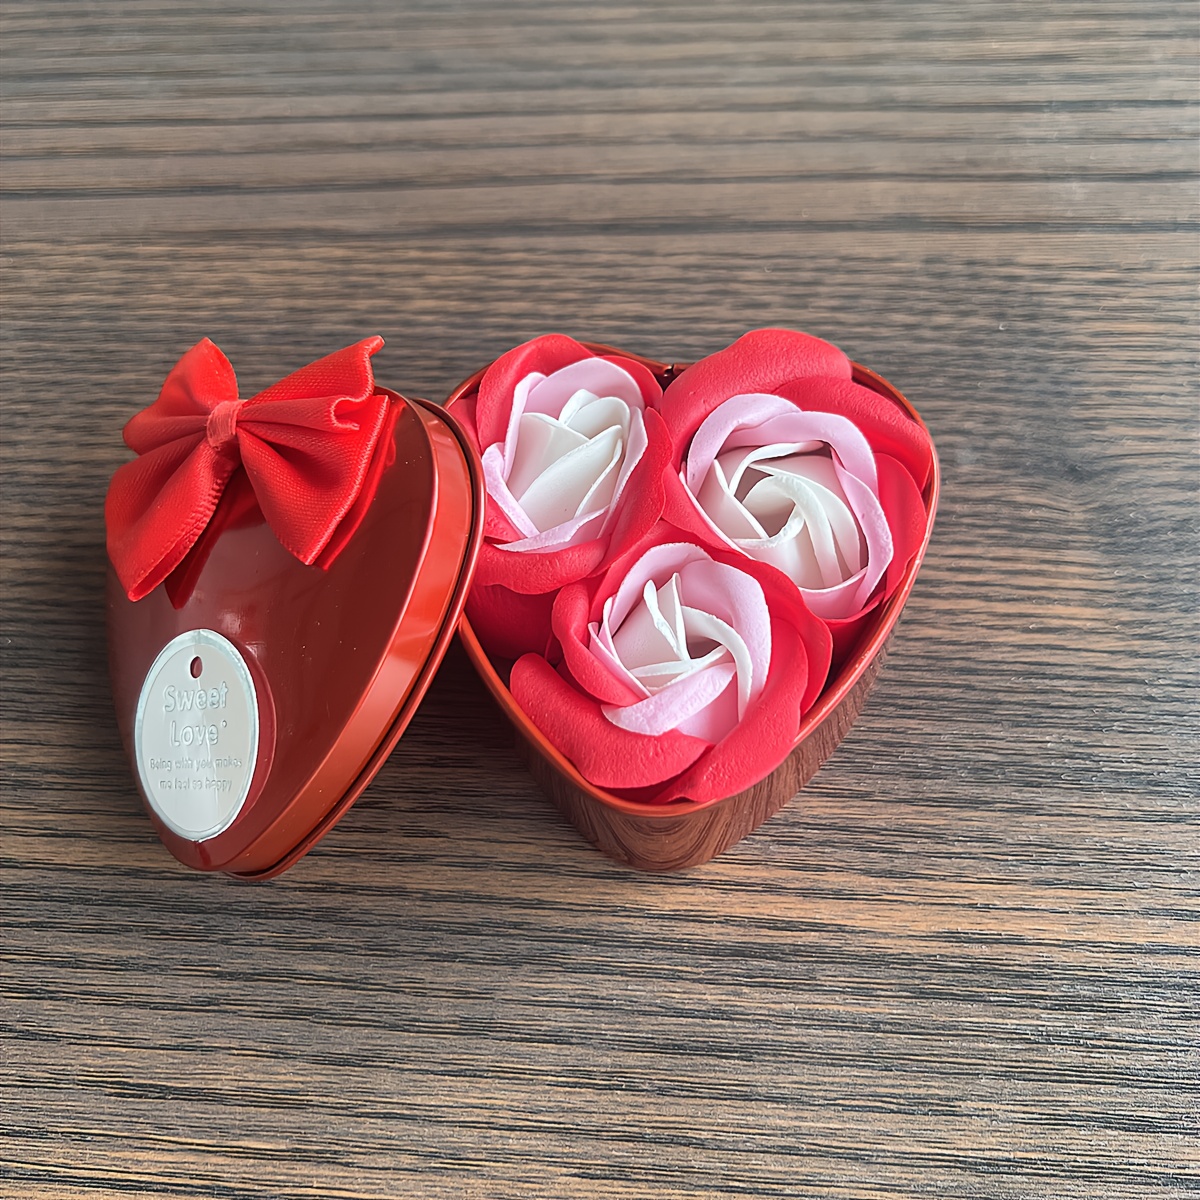 1 Pack, Heart-Shaped Soap Box With Rose Flowers - Perfect Valentine's Day  Gift, Party Decor, And Couple Gift For Home Or Office, Creative Gifts, Valen